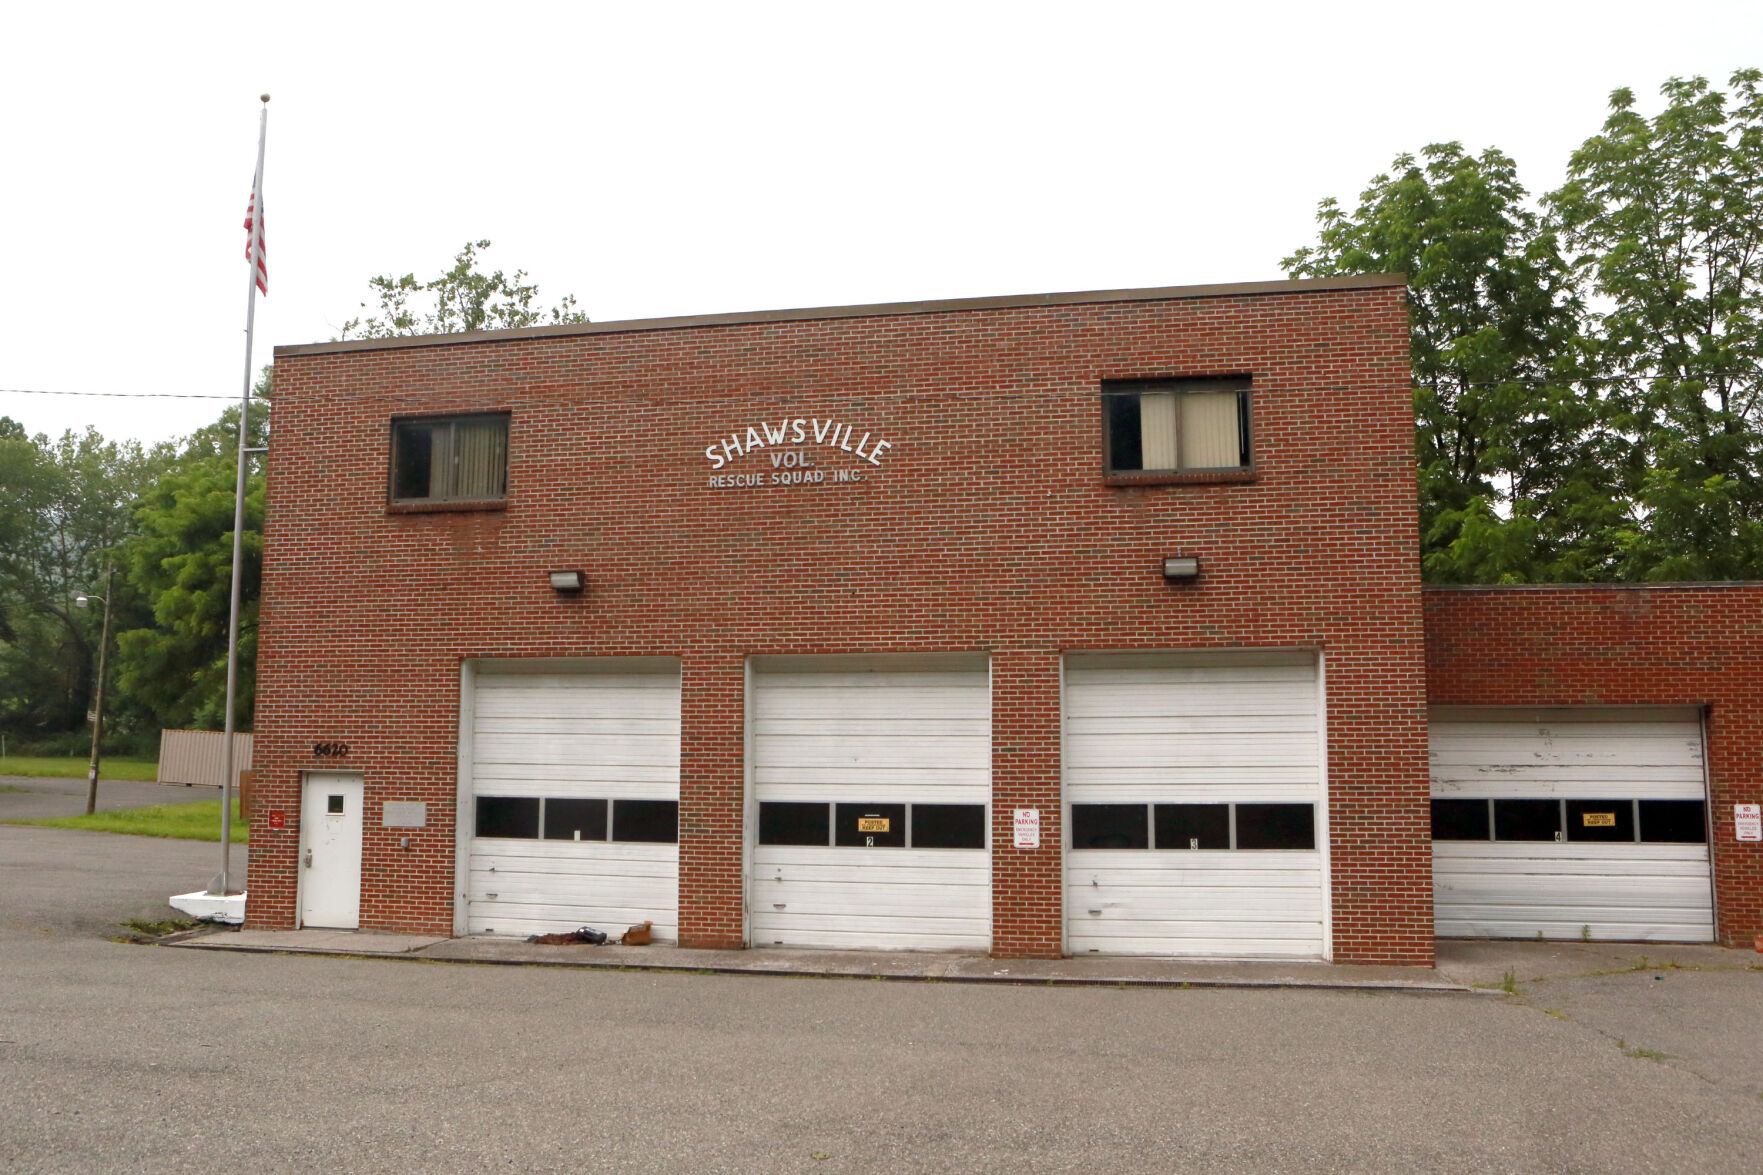 Shawsville rescue squad proceeds to go to charitable causes hq nude pic